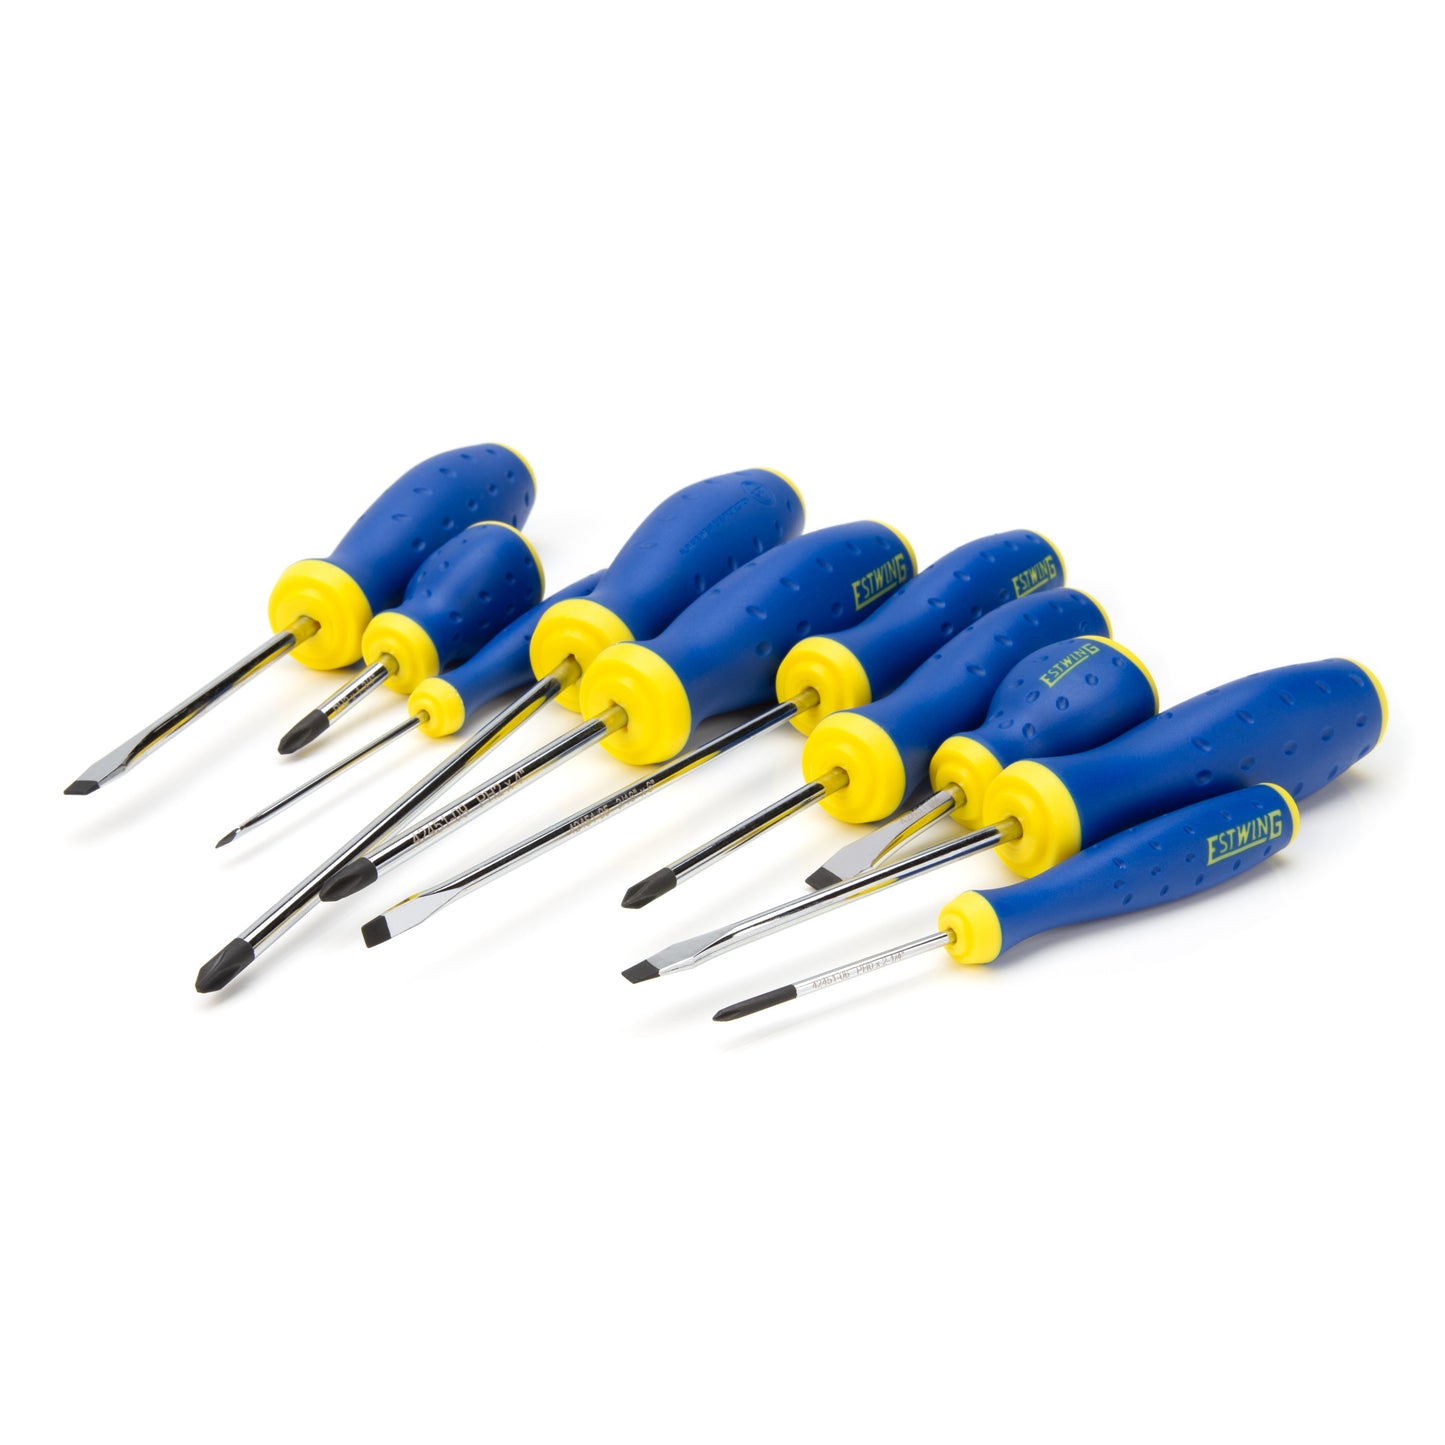 10-Piece Phillips and Slotted Screwdriver Set